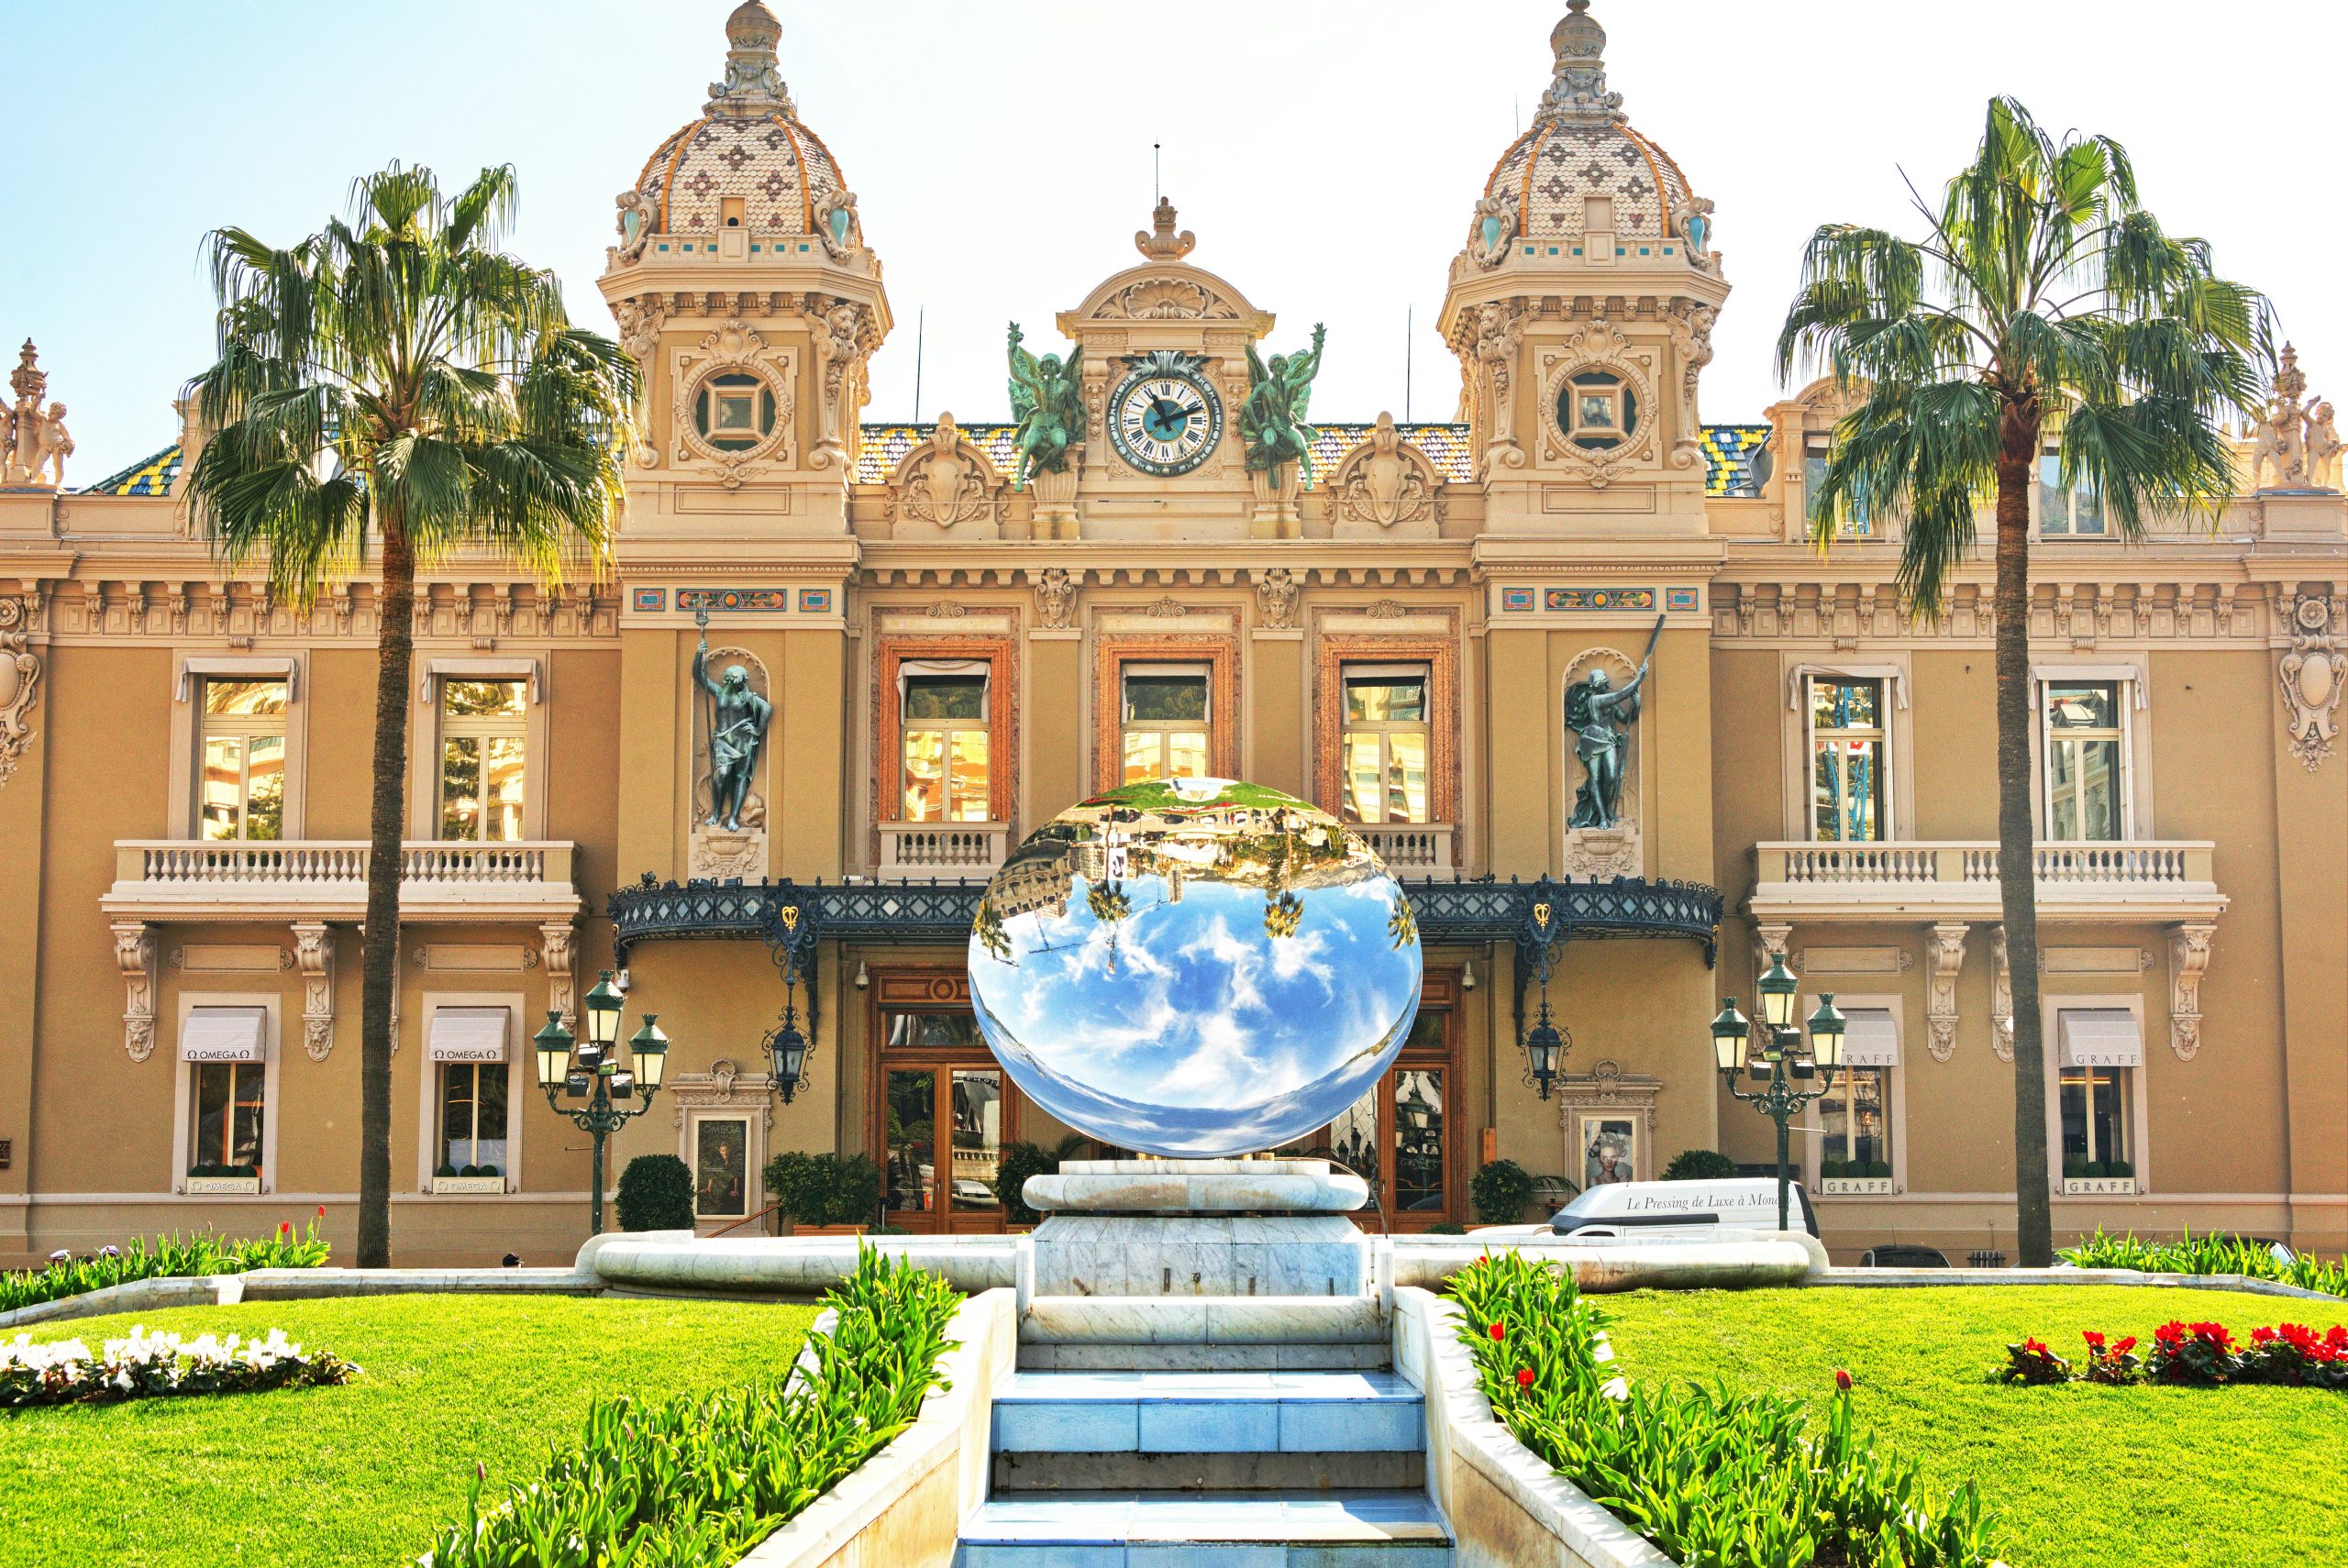 discover the beauty and luxury of monaco, a glamorous destination known for its stunning views, high-end casinos, and prestigious events.